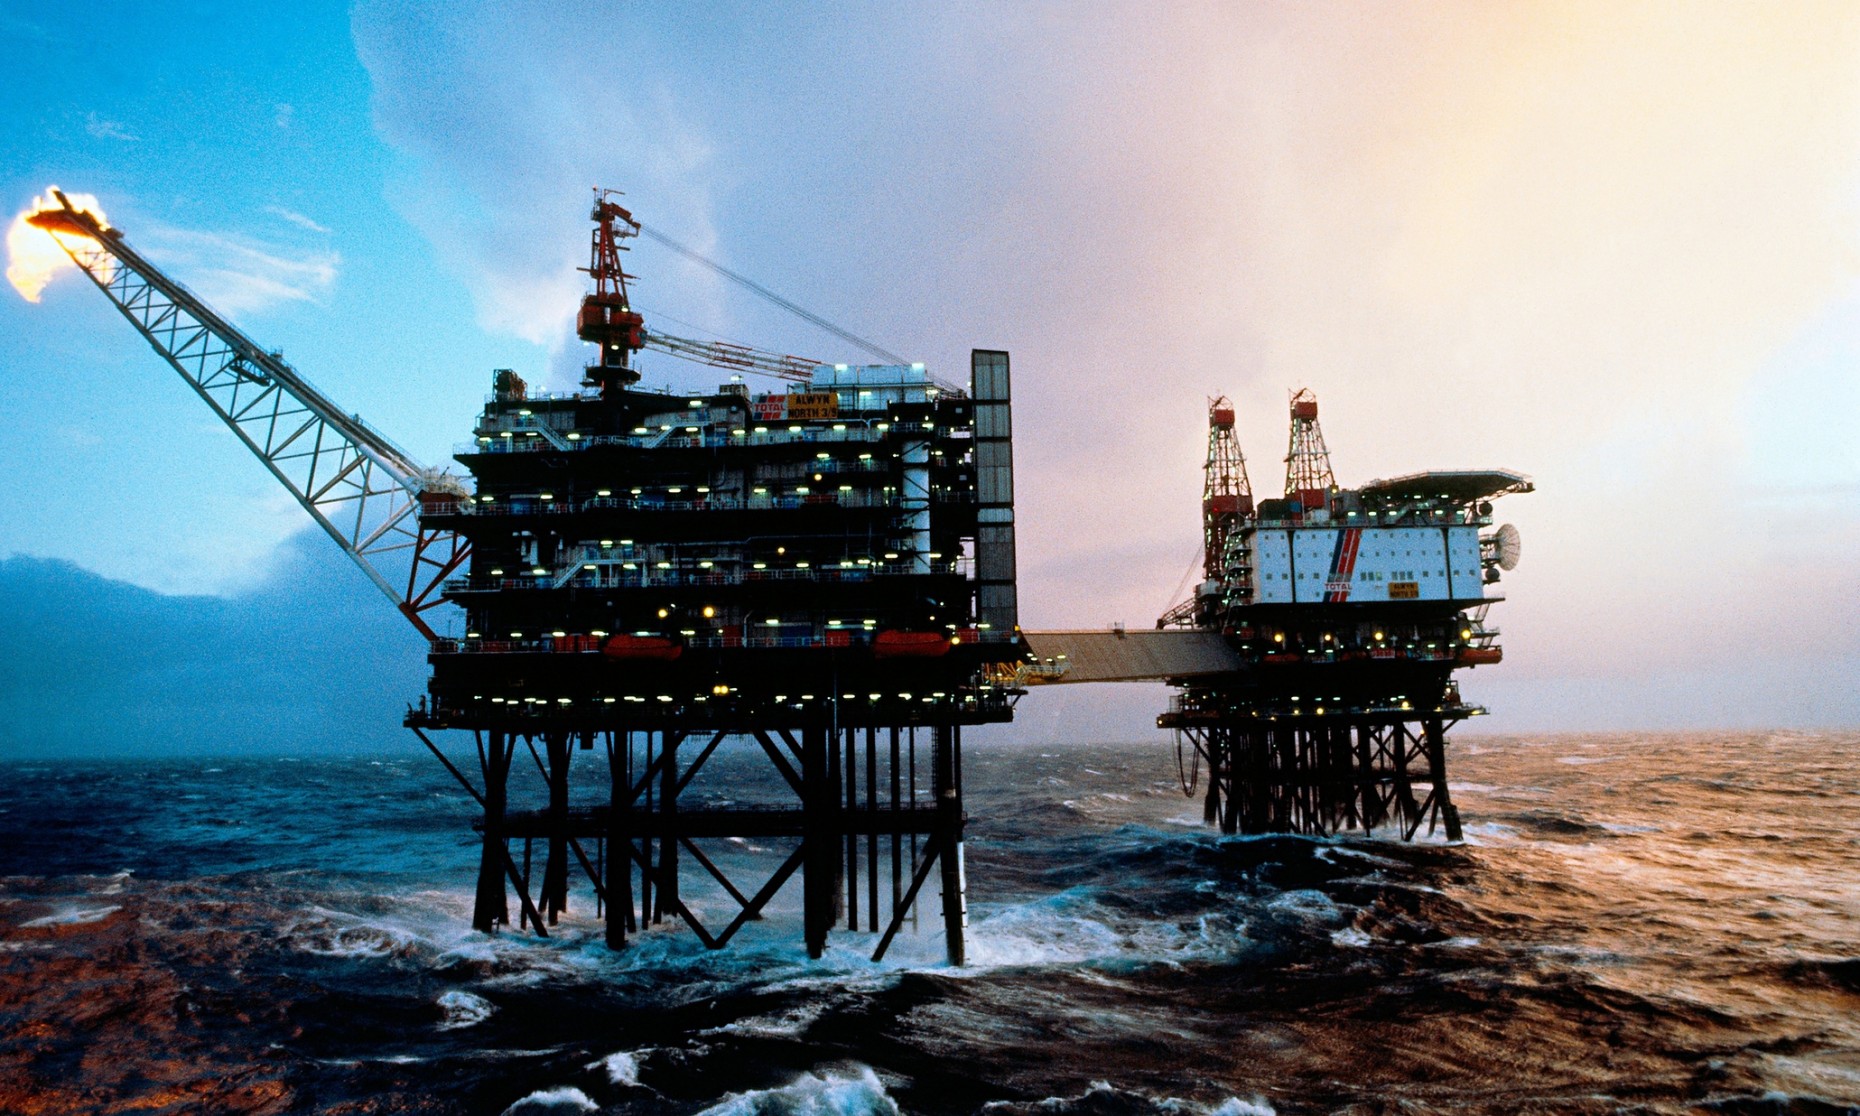 The Fuse | Oil platforms in the Brent field in the North Sea. - The Fuse